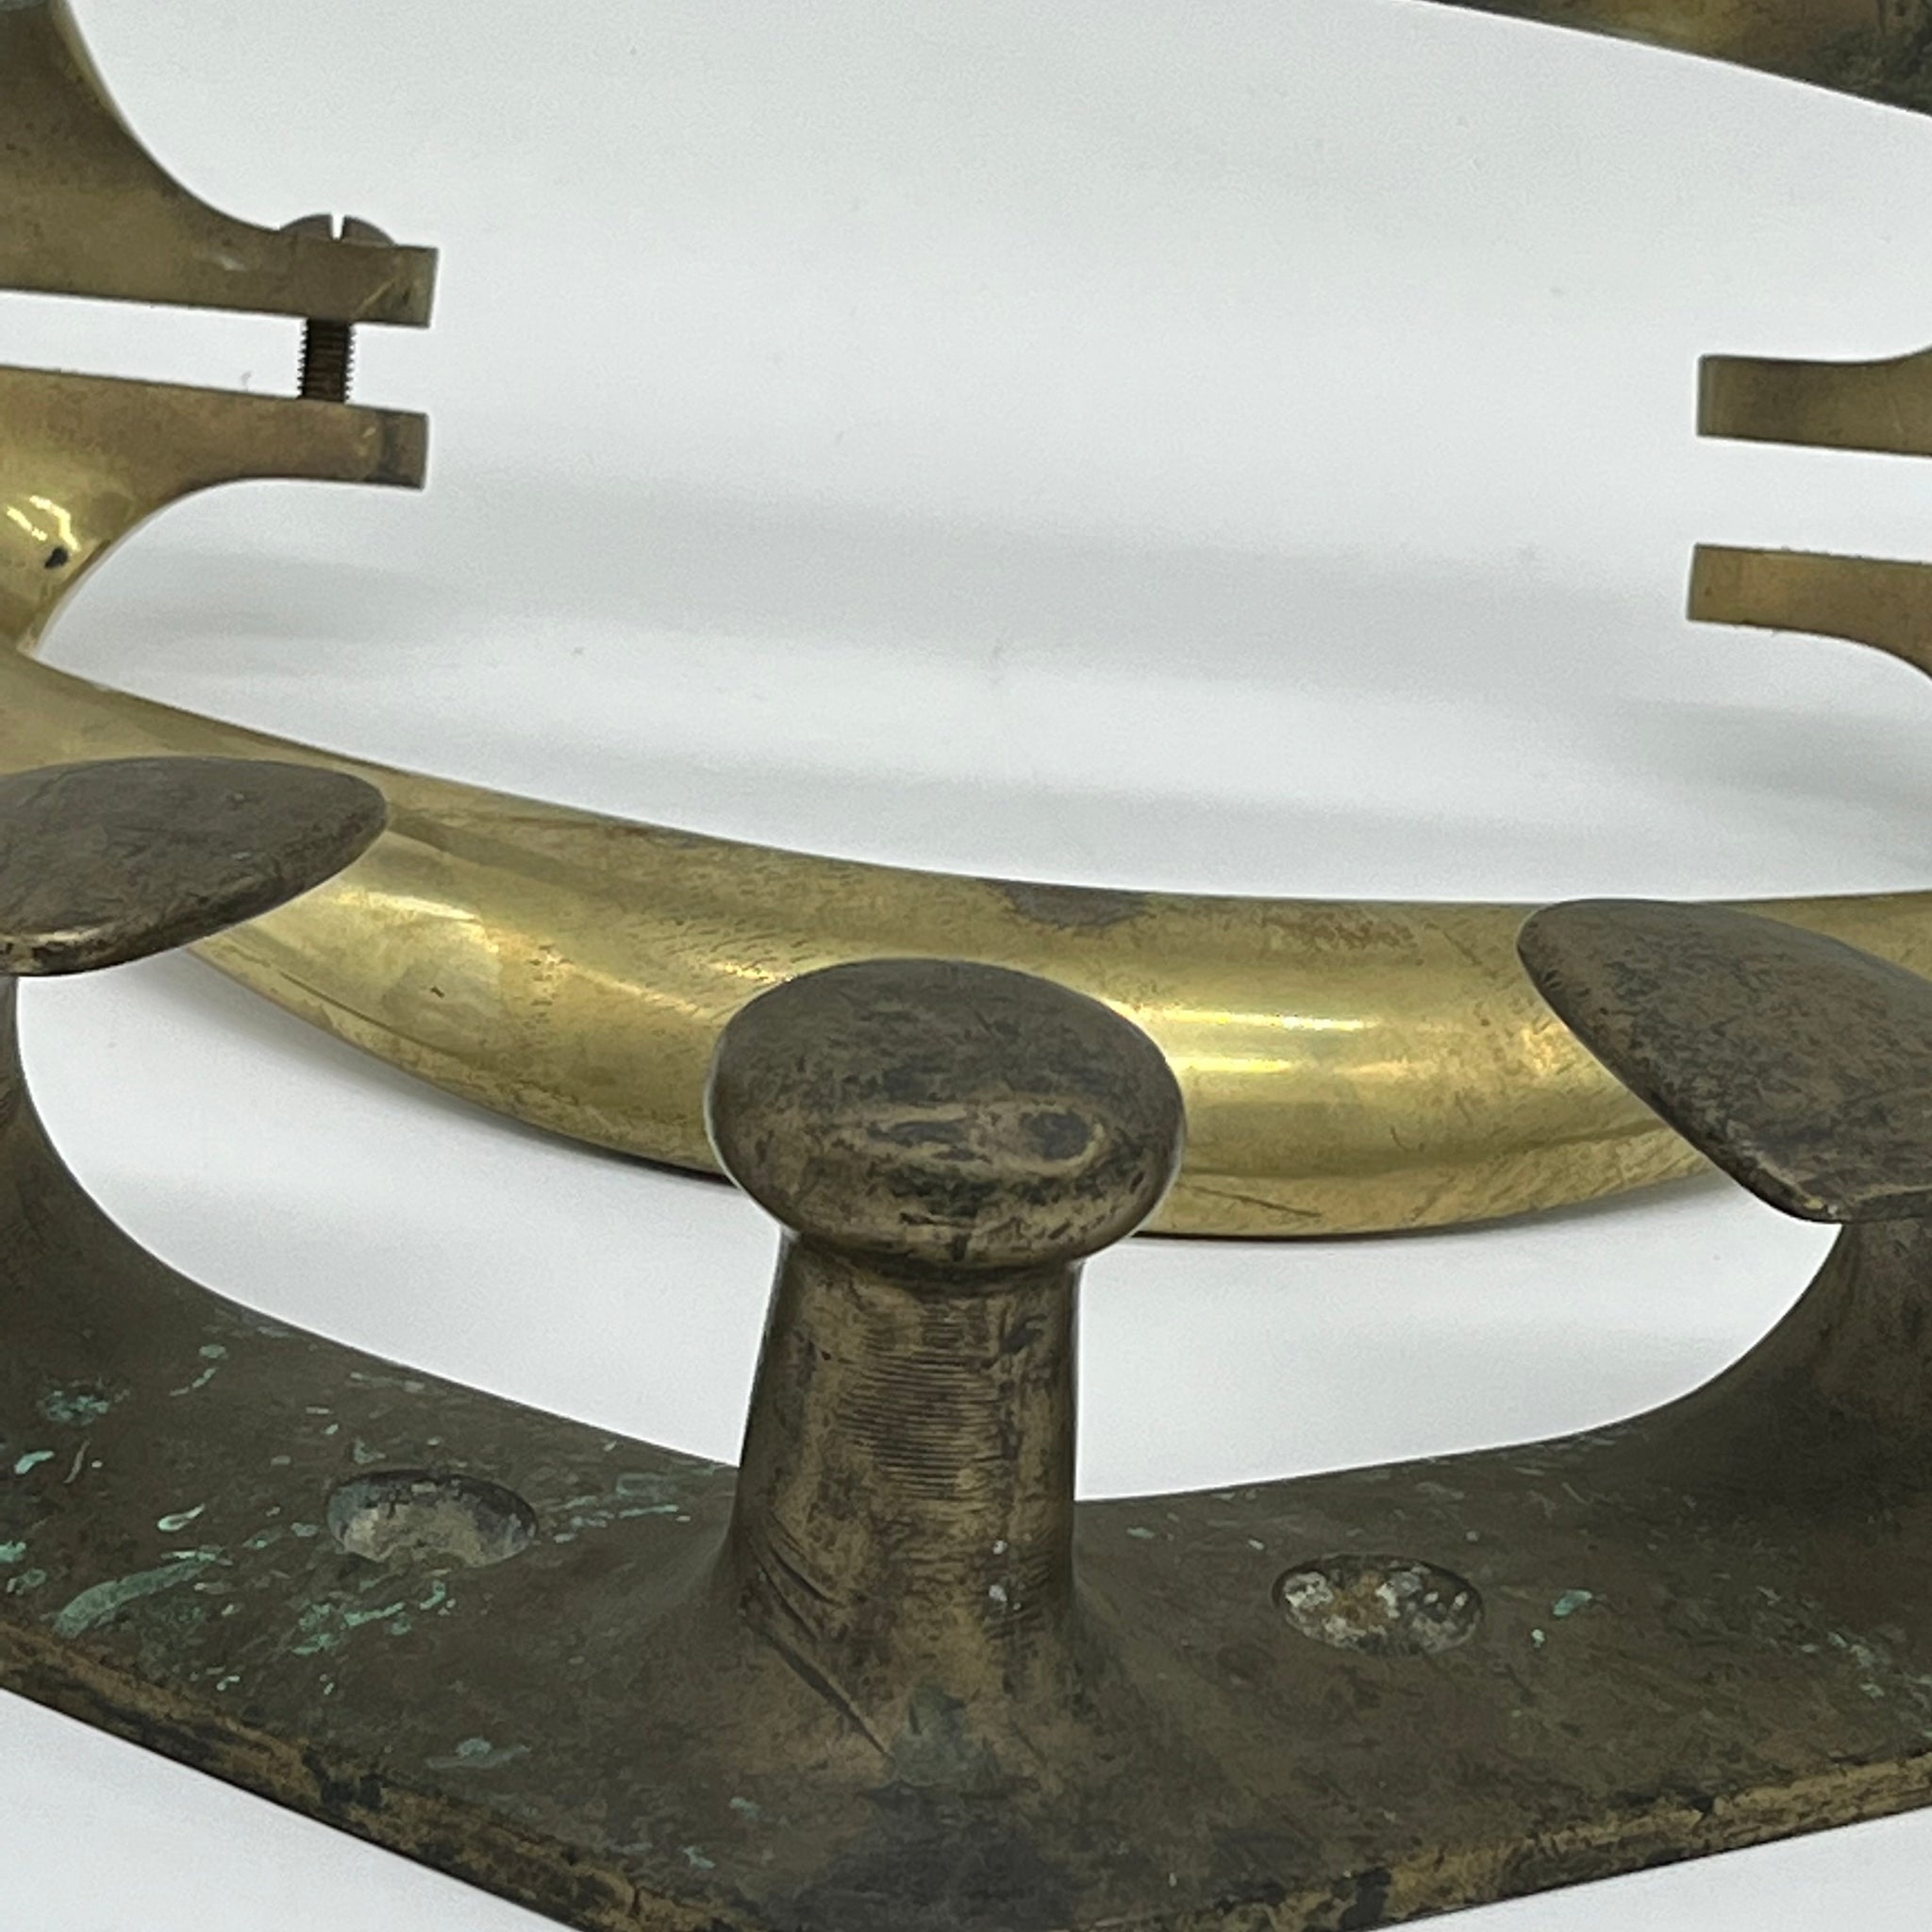 Two bronze boat elements